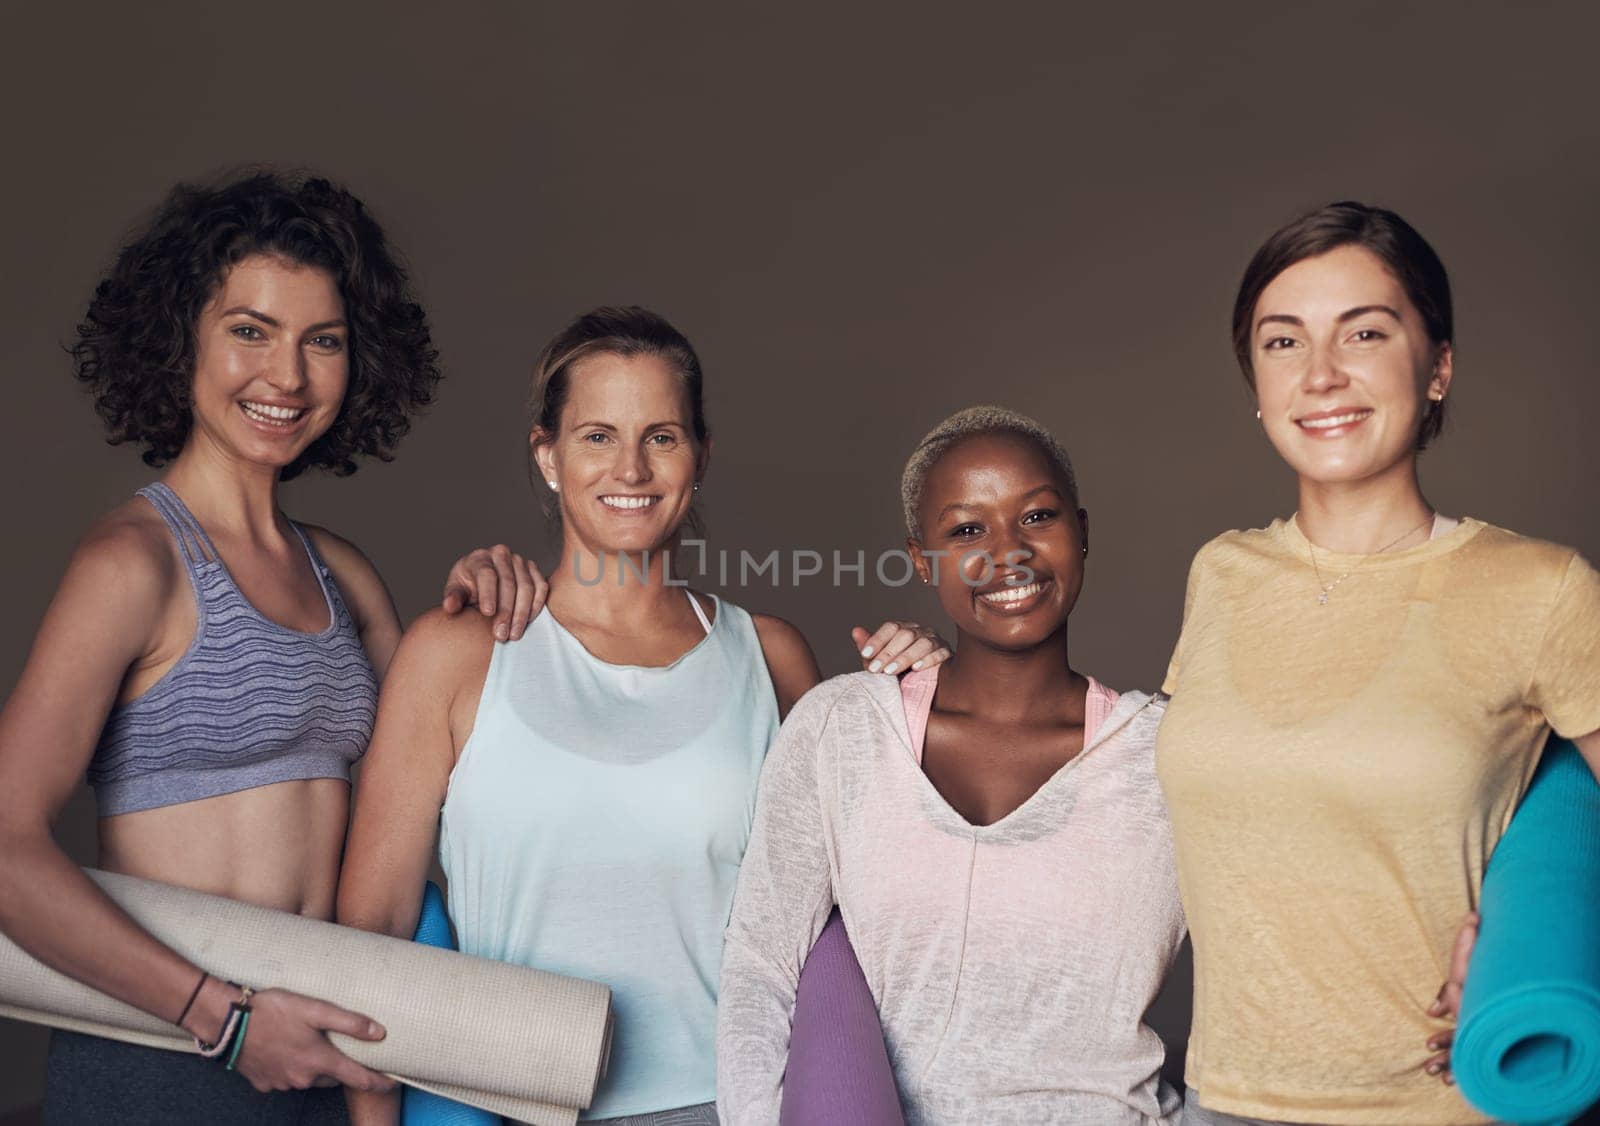 Yoga buddies for life. Cropped portrait of a young group of woman sitting together and bonding during an indoor yoga session